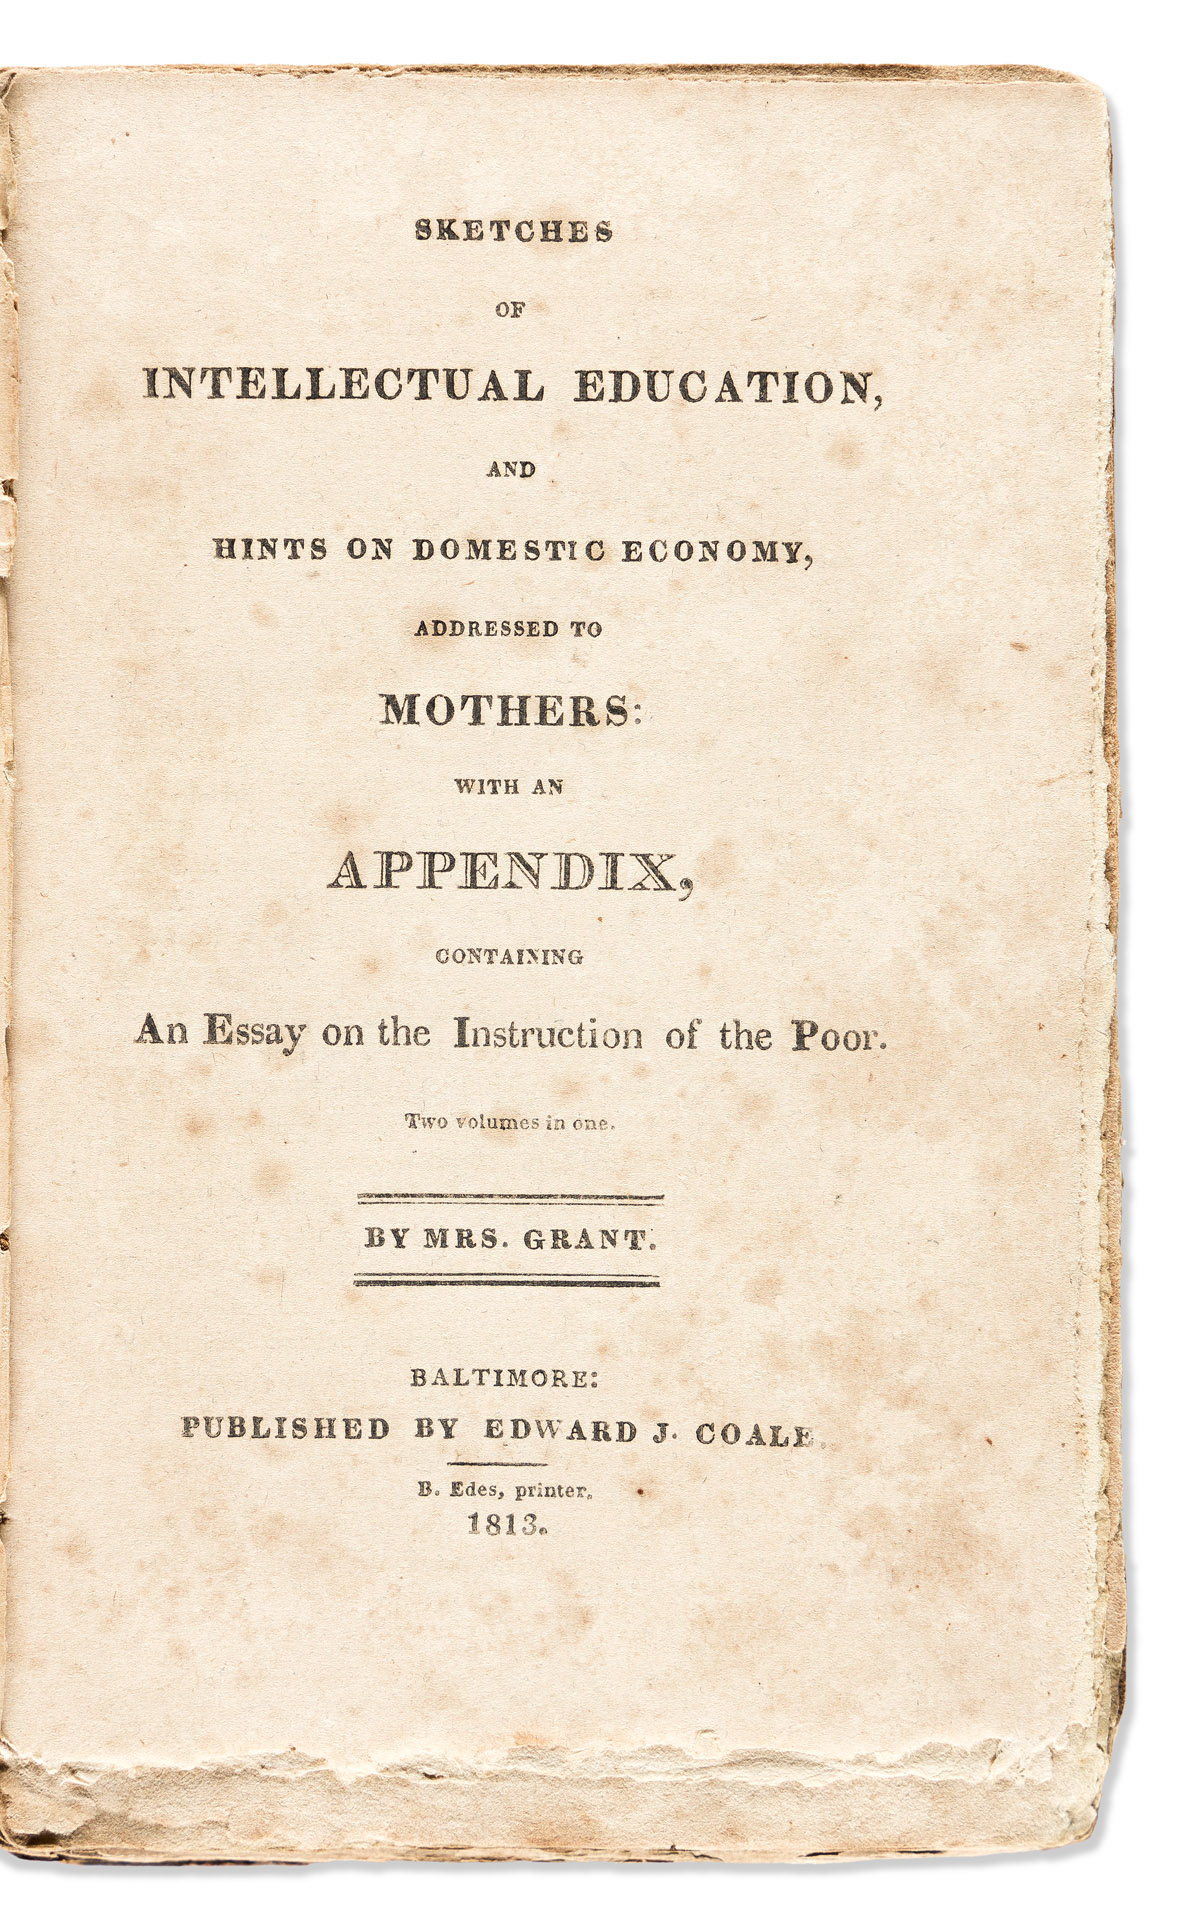 Grant, Beatrice of Duthil (1761-1845) Sketches of Intellectual Education and Hints on Domestic Economy Addressed to Mothers.